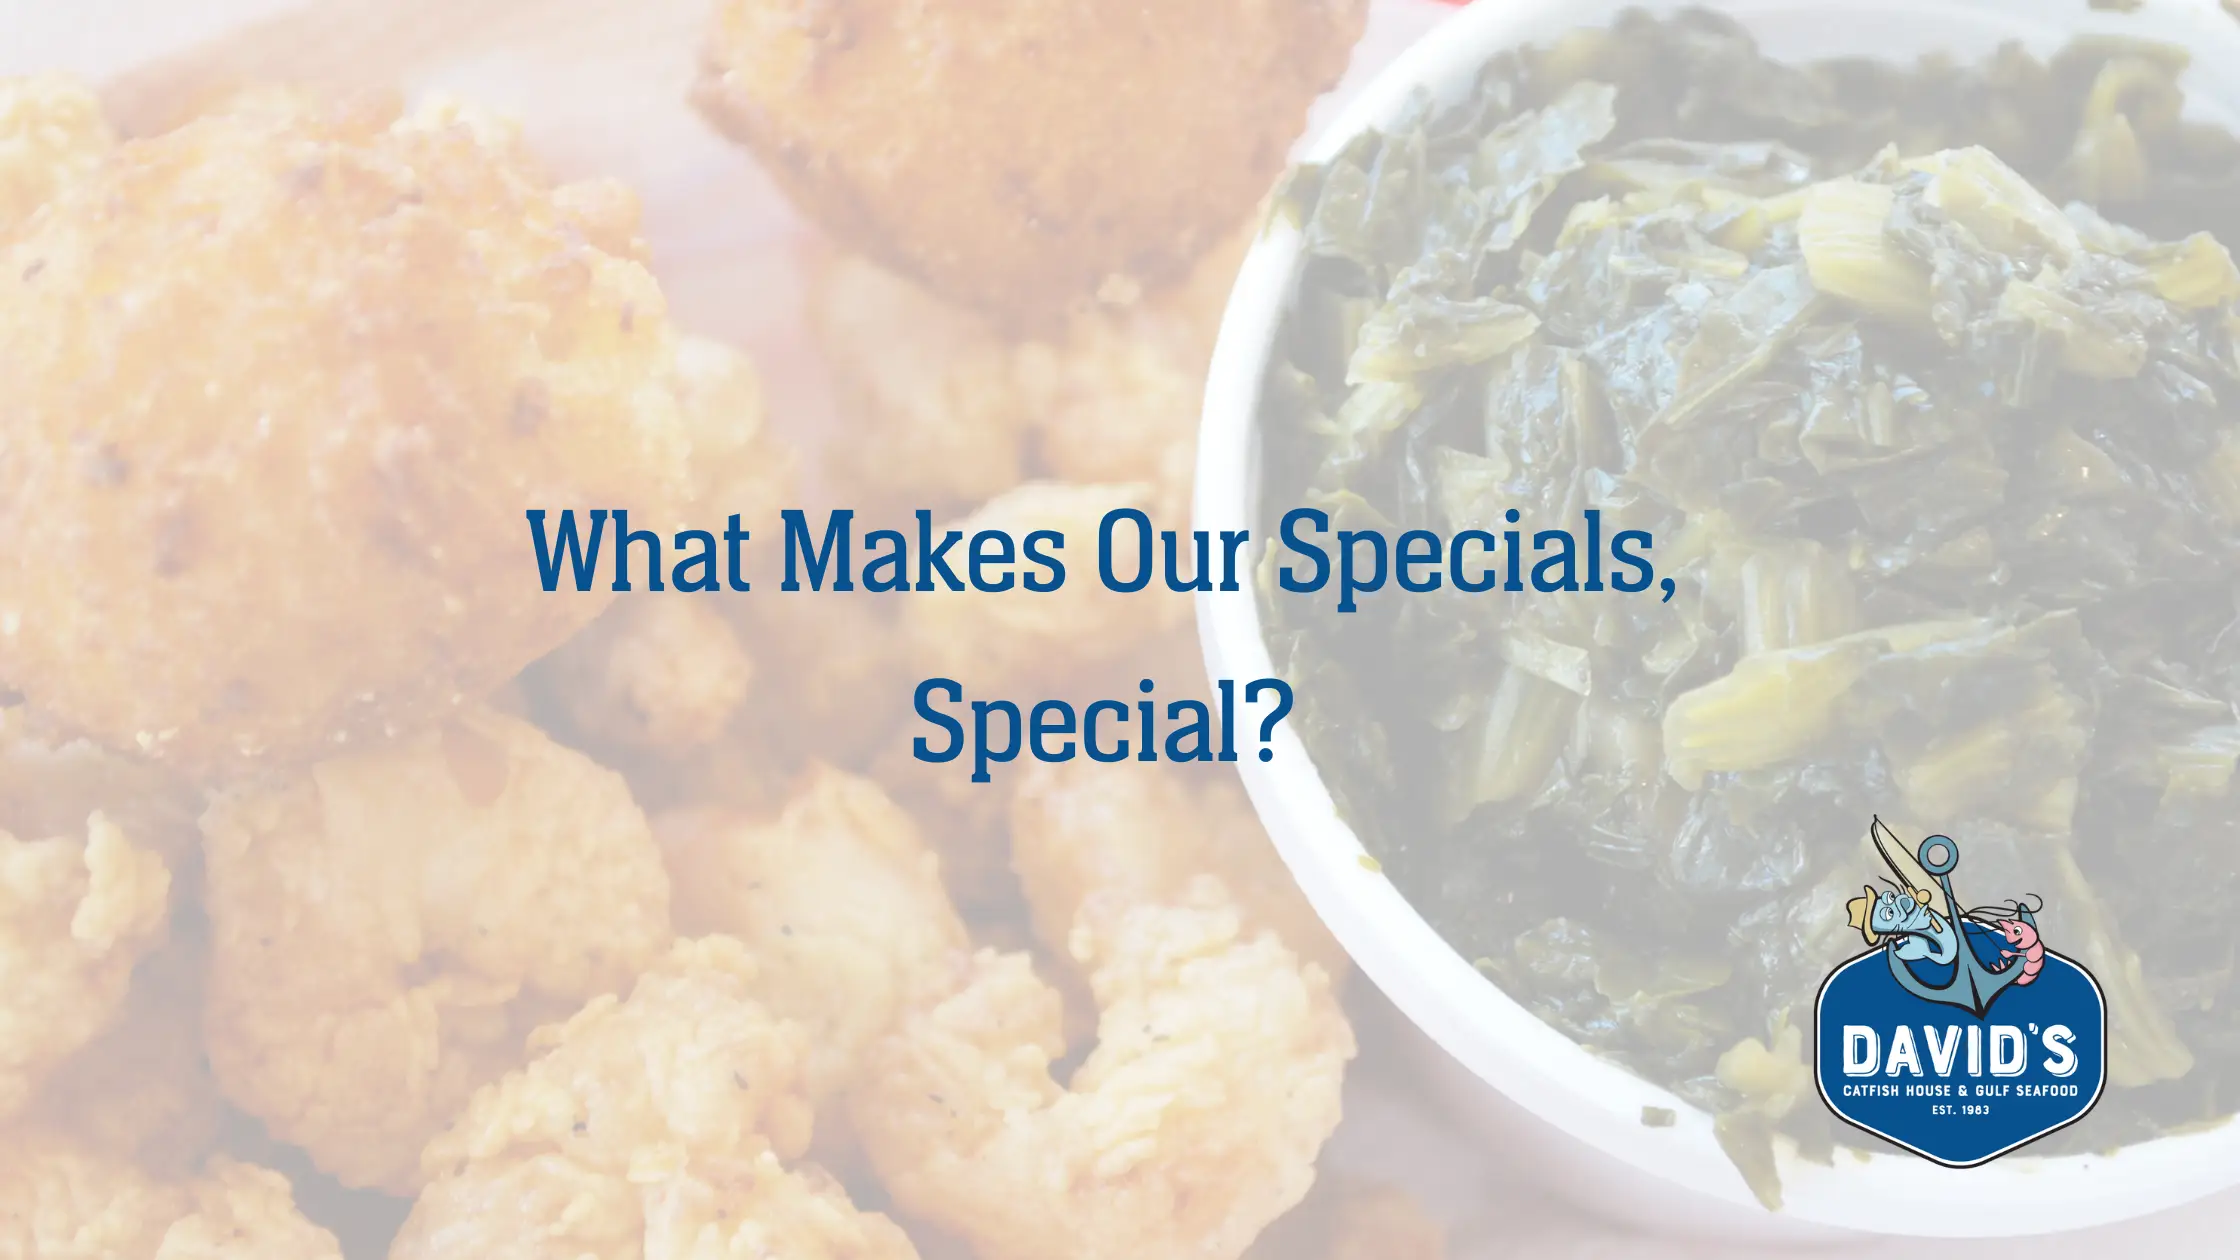 What Makes Our Specials, Special?